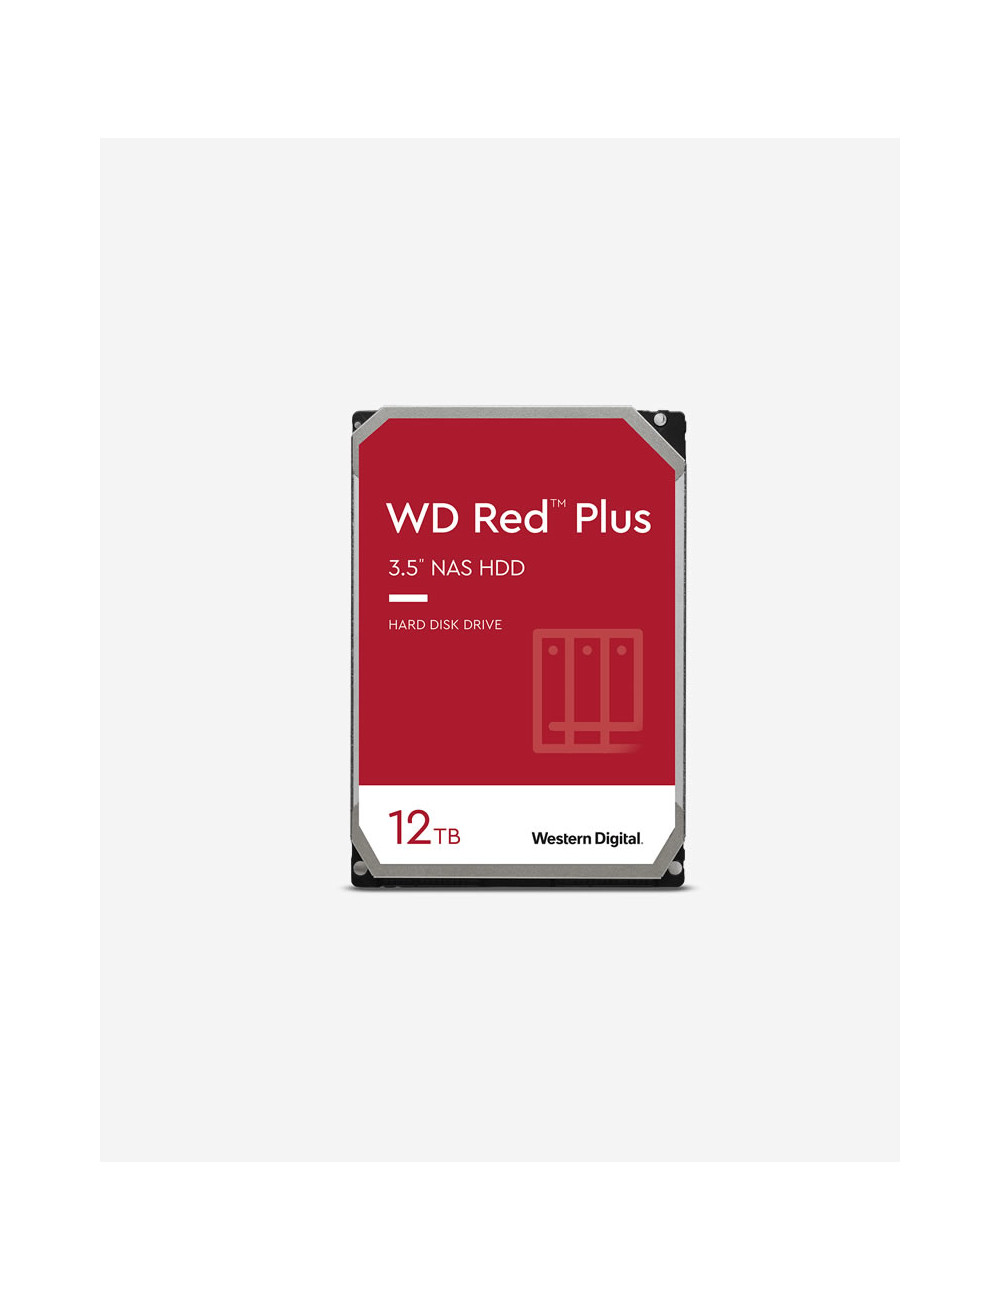 WD RED PLUS 12TB 3.5" HDD Drive